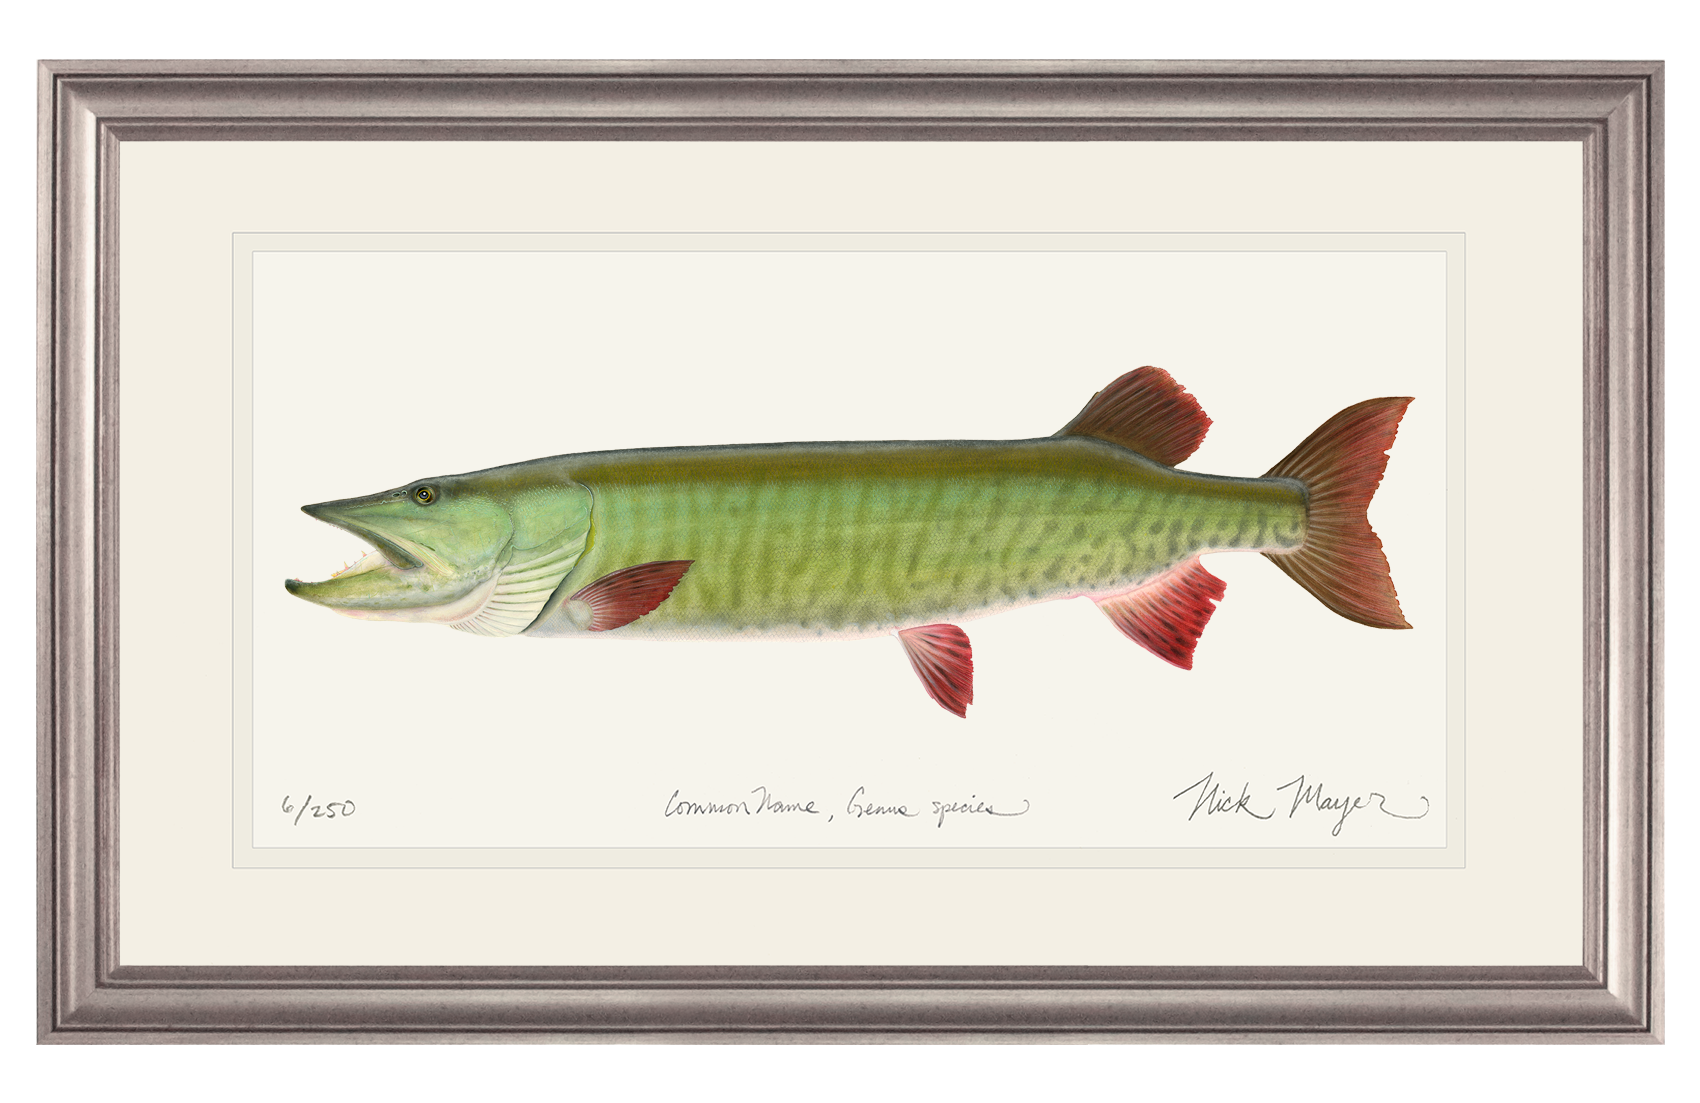 50 Muskie Print - The ultimate gamefish for fly fishing enthusiasts